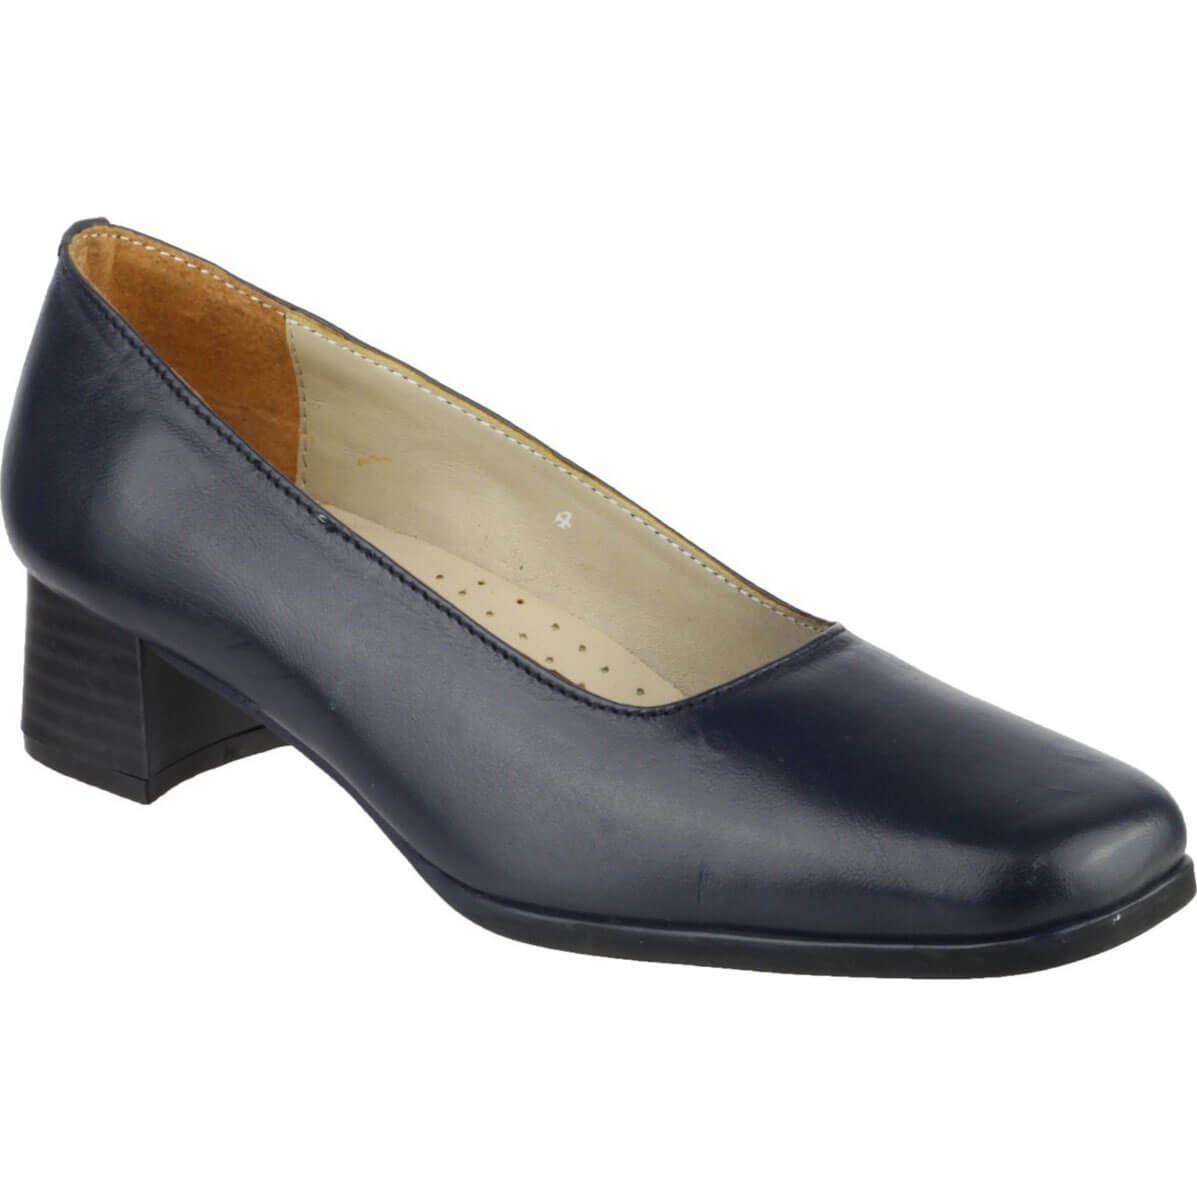 Image of Amblers Walford Ladies Shoes Leather Court Navy Size 4